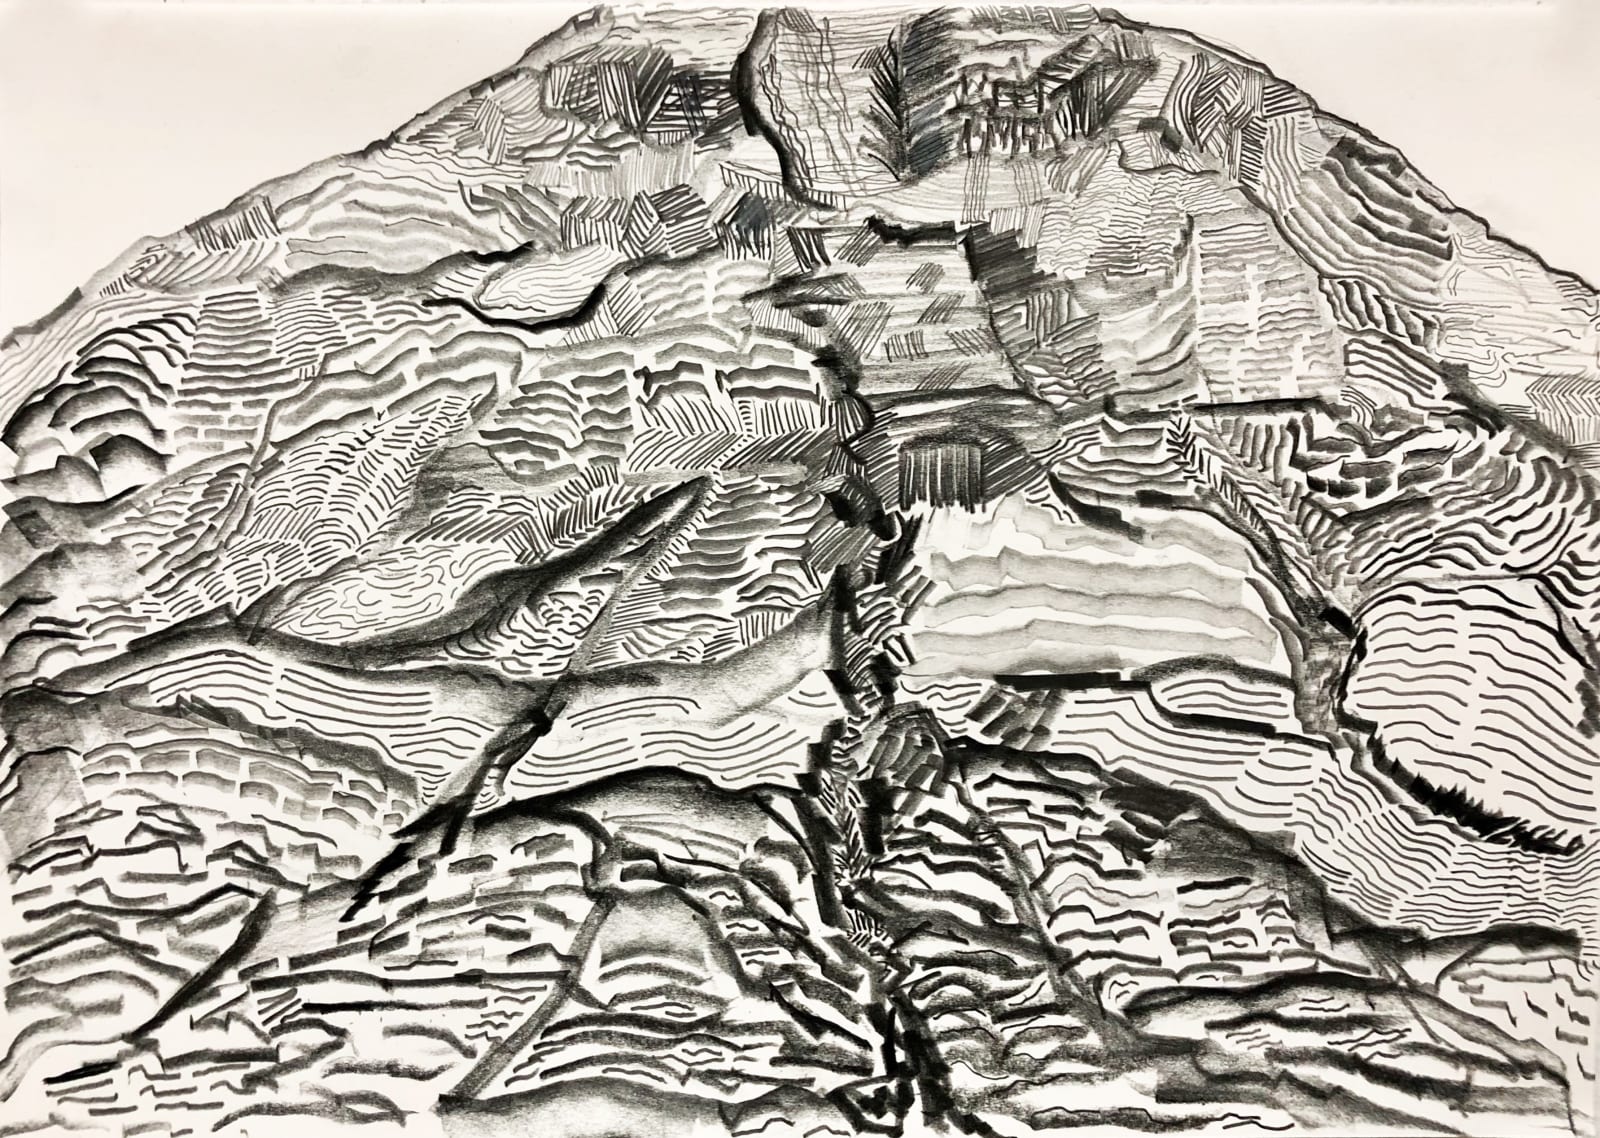 Nate Cassie Mountain drawn from memory while the person is sitting on the mountain (Kohala, June 23-July 5, 2021), 2021 Mixed media on paper 12 x 16 in 30.5 x 40.6 cm